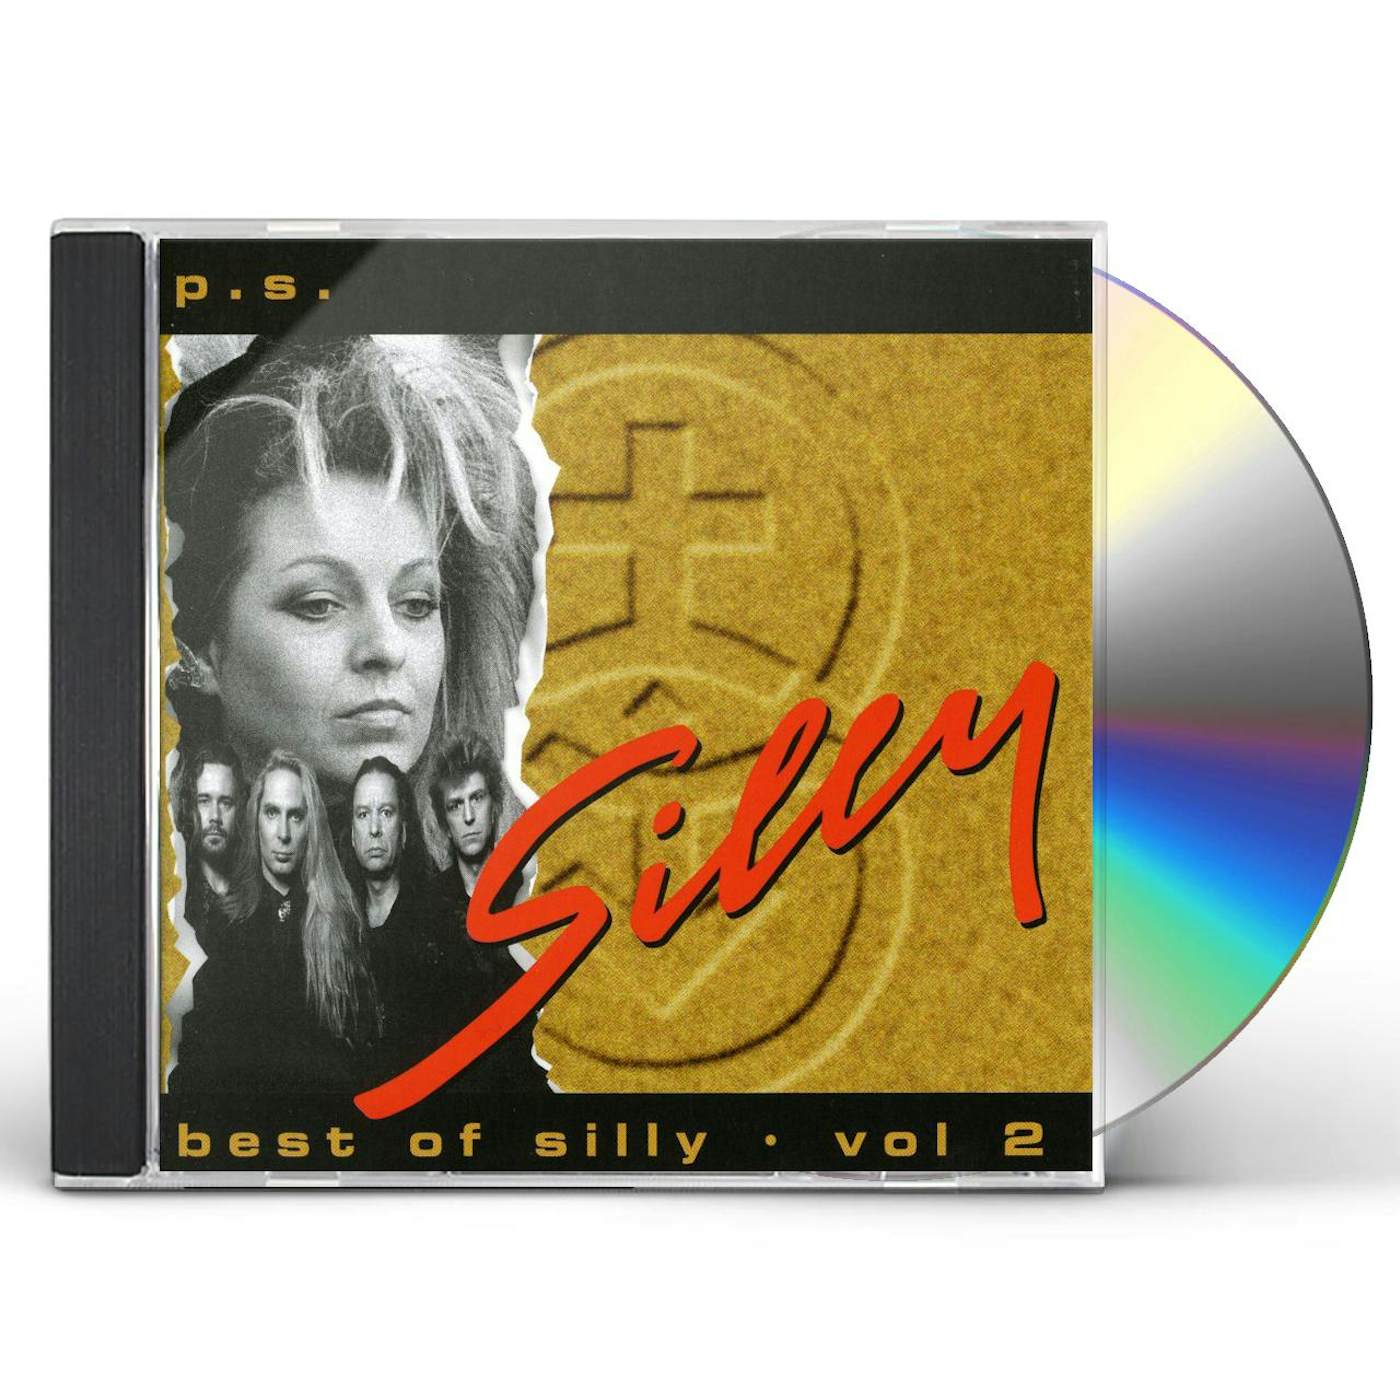 P.S. BEST OF SILLY VOL. 2 CD